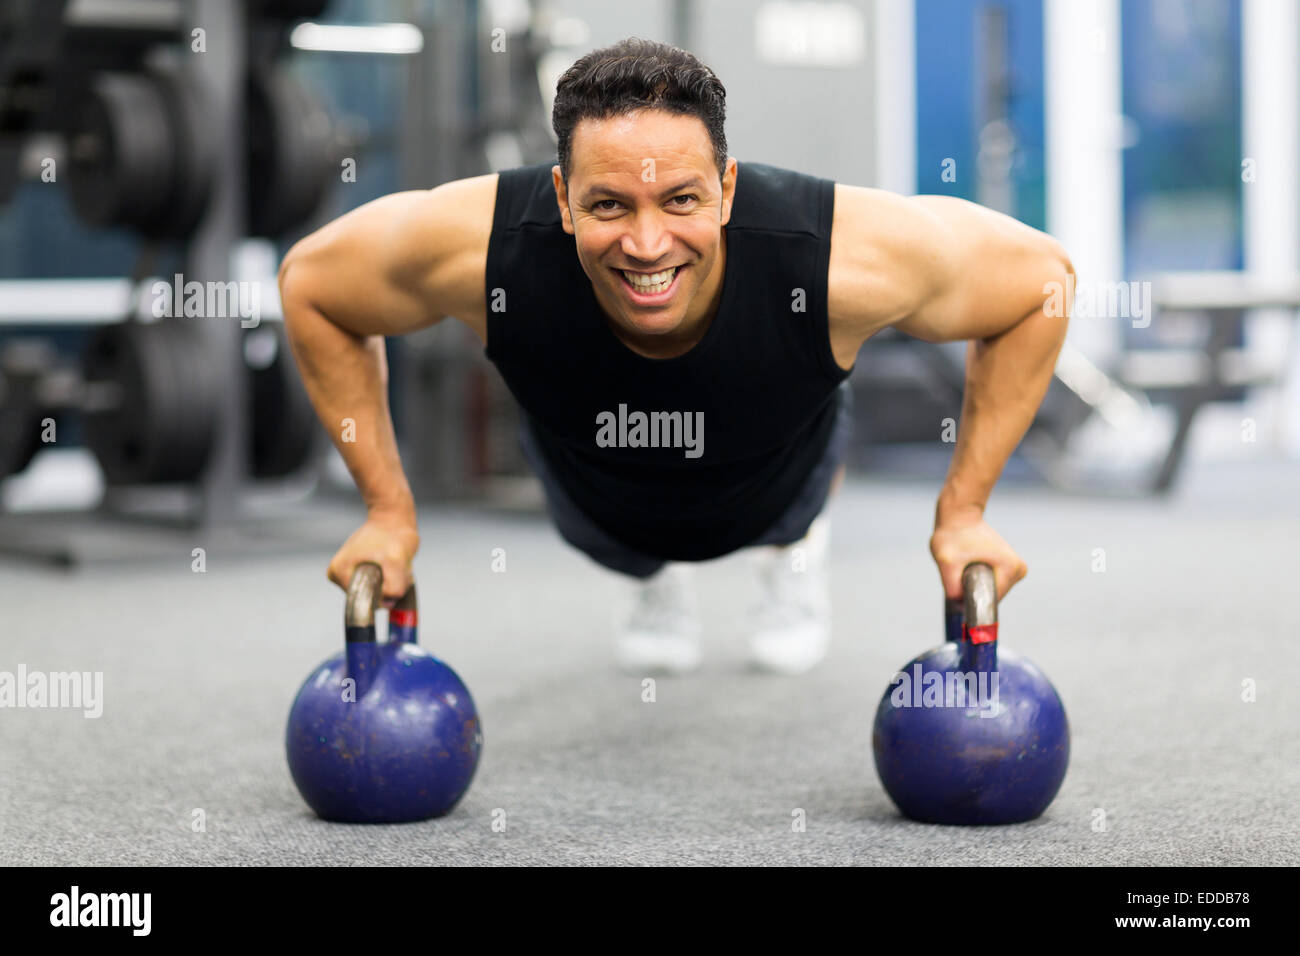 healthy man doing pushup exercise with kettle bell in gym Stock Photo